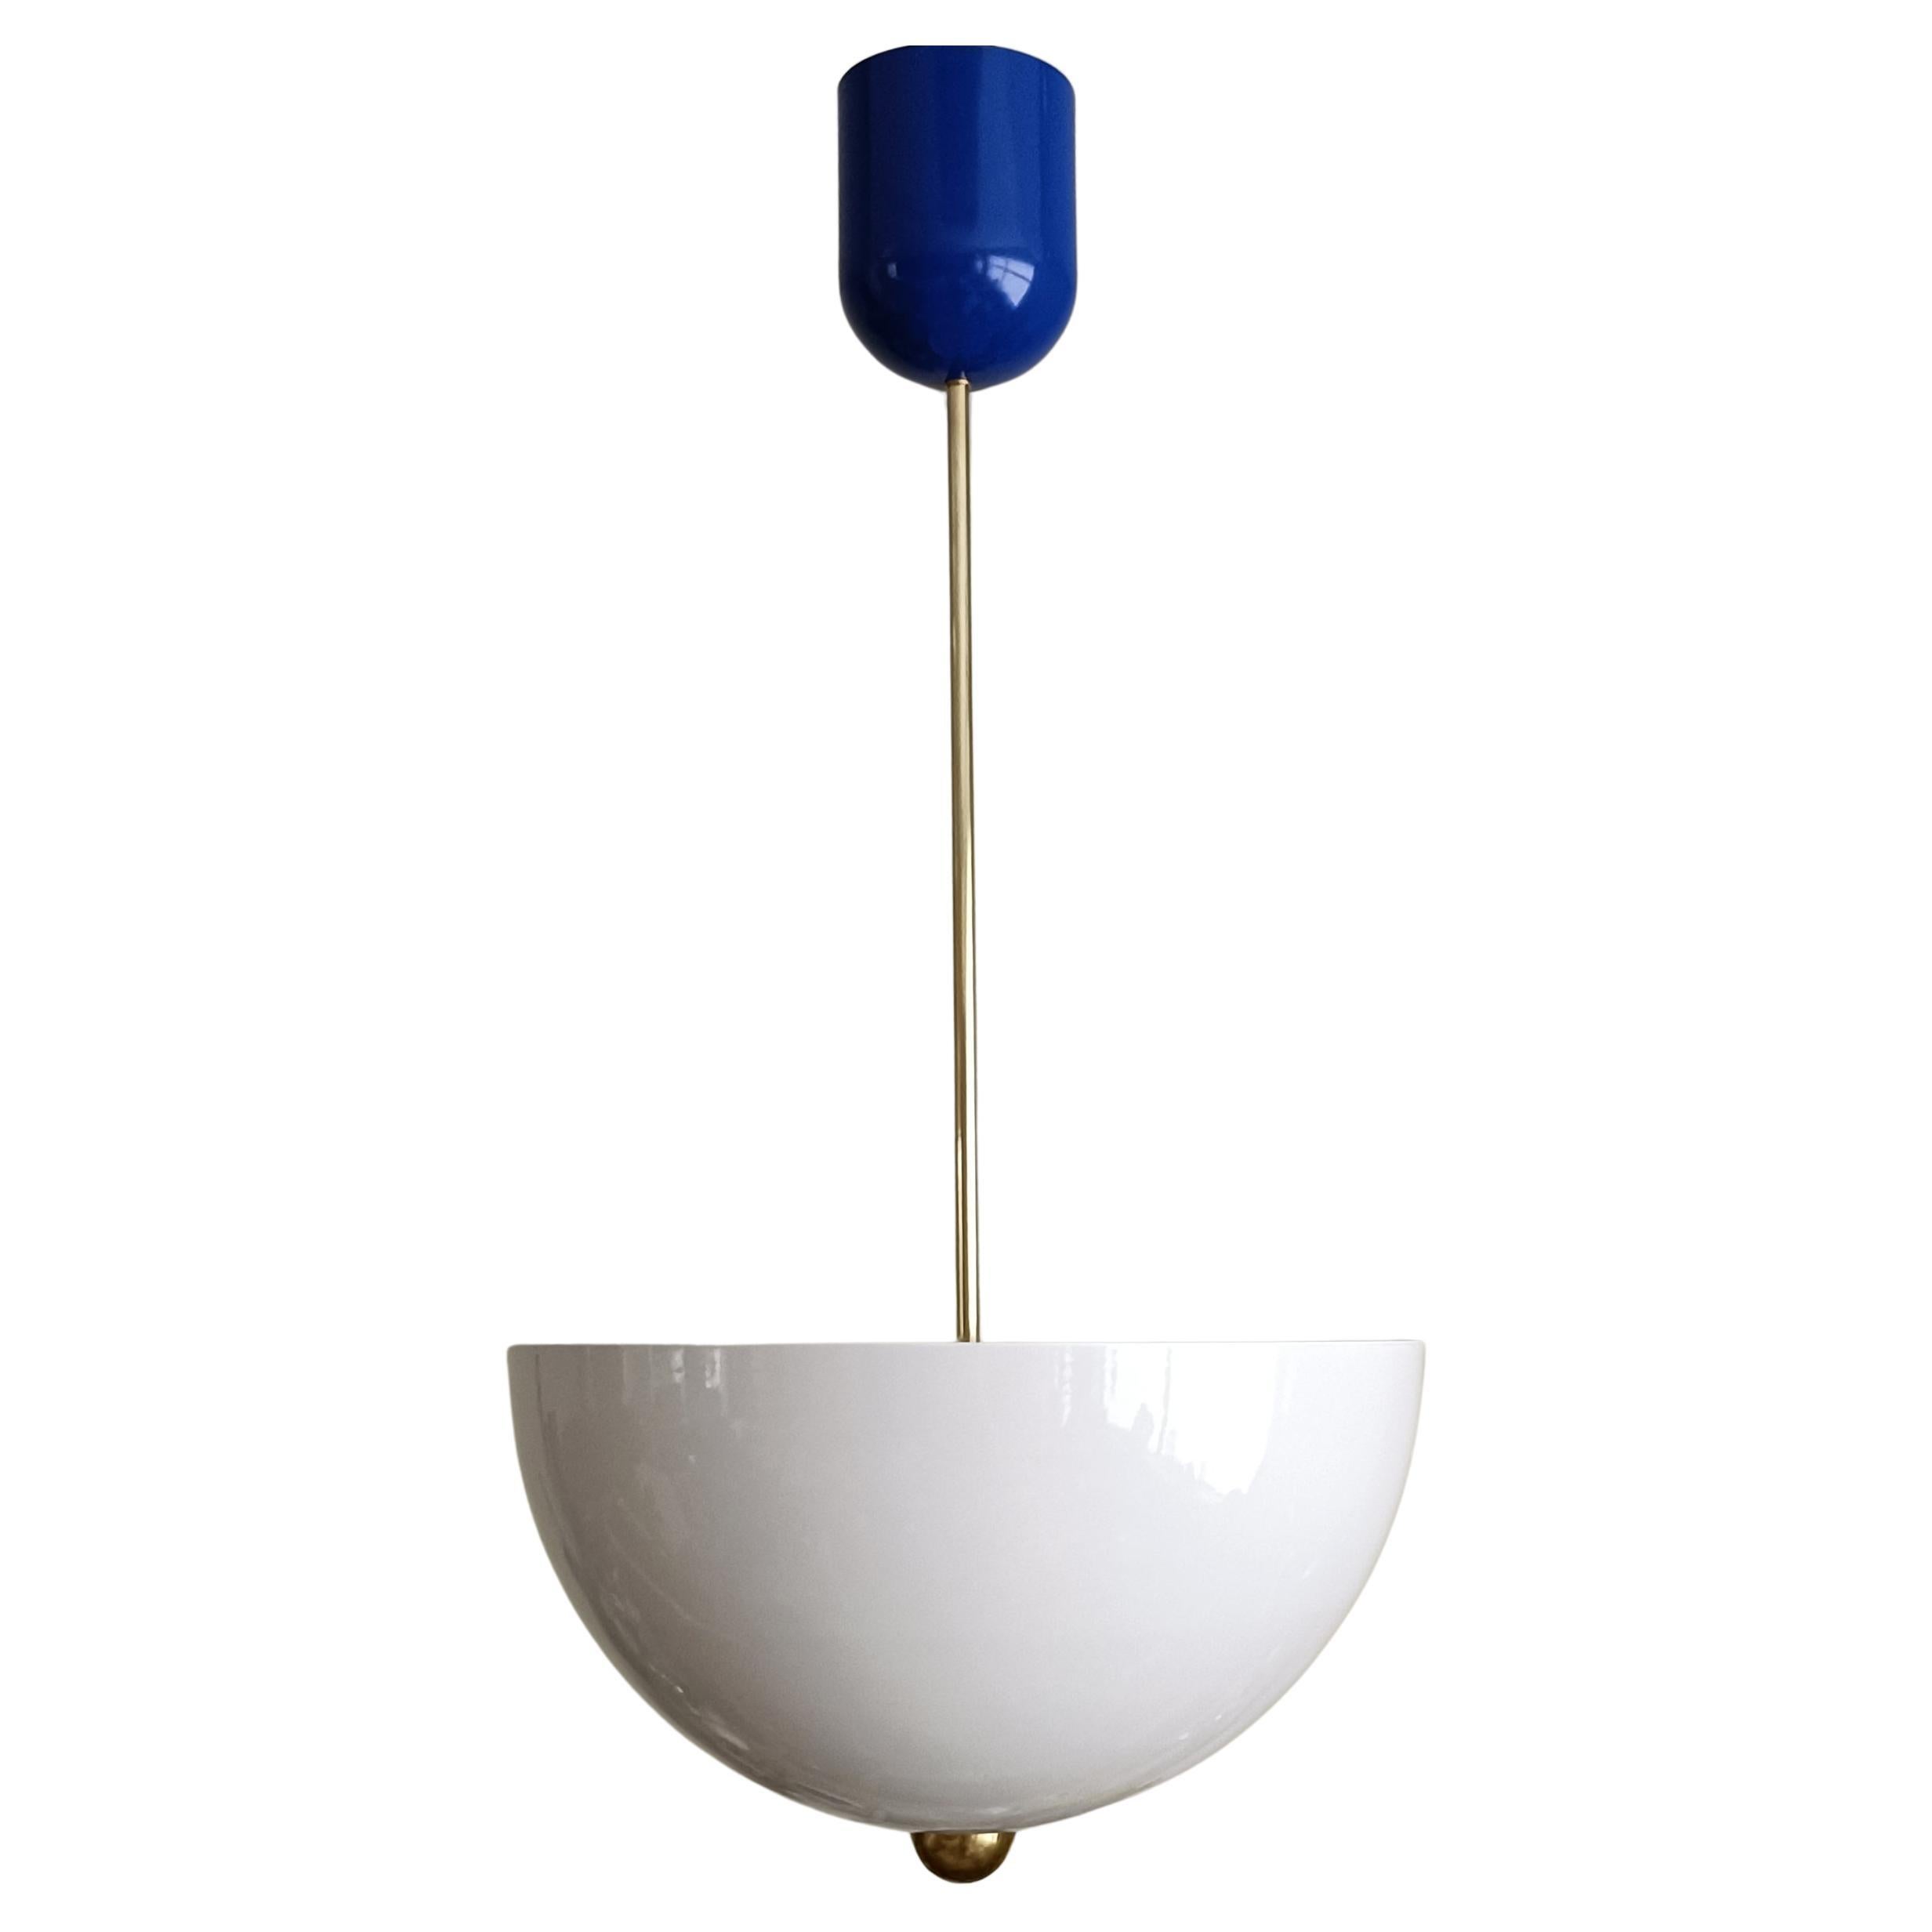 Lebos - large pendant by Candas Design, White cream/navy blue and brass